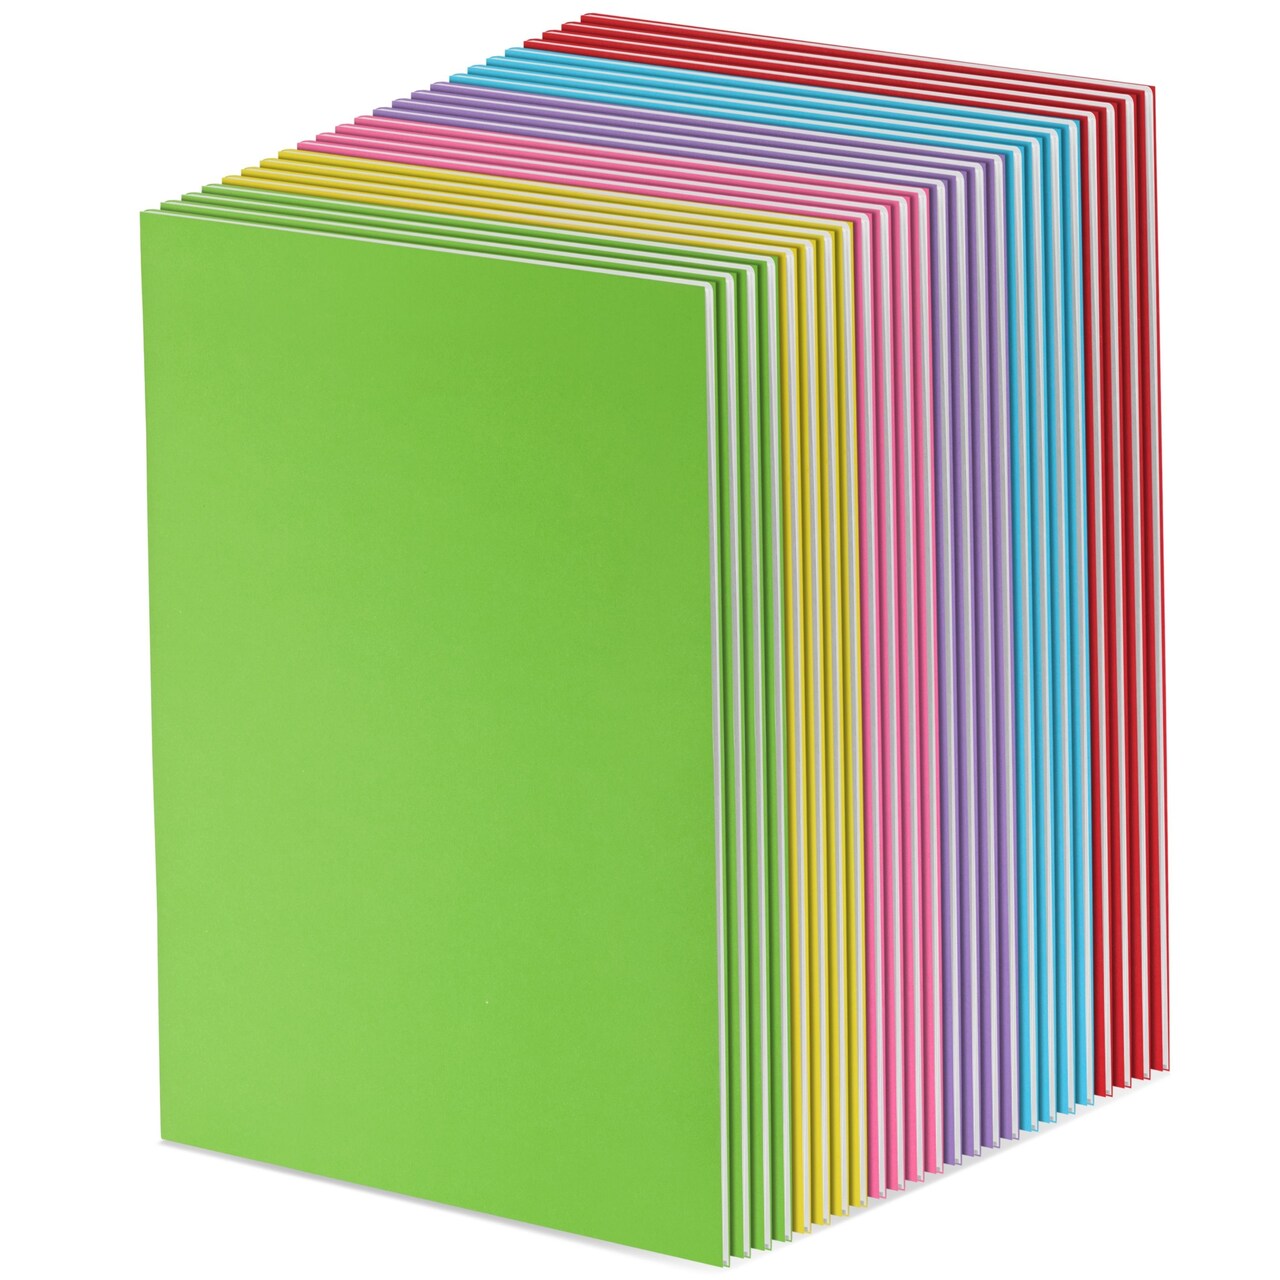 24 Pack Unlined Notebooks for Students, Blank Books for Kids to